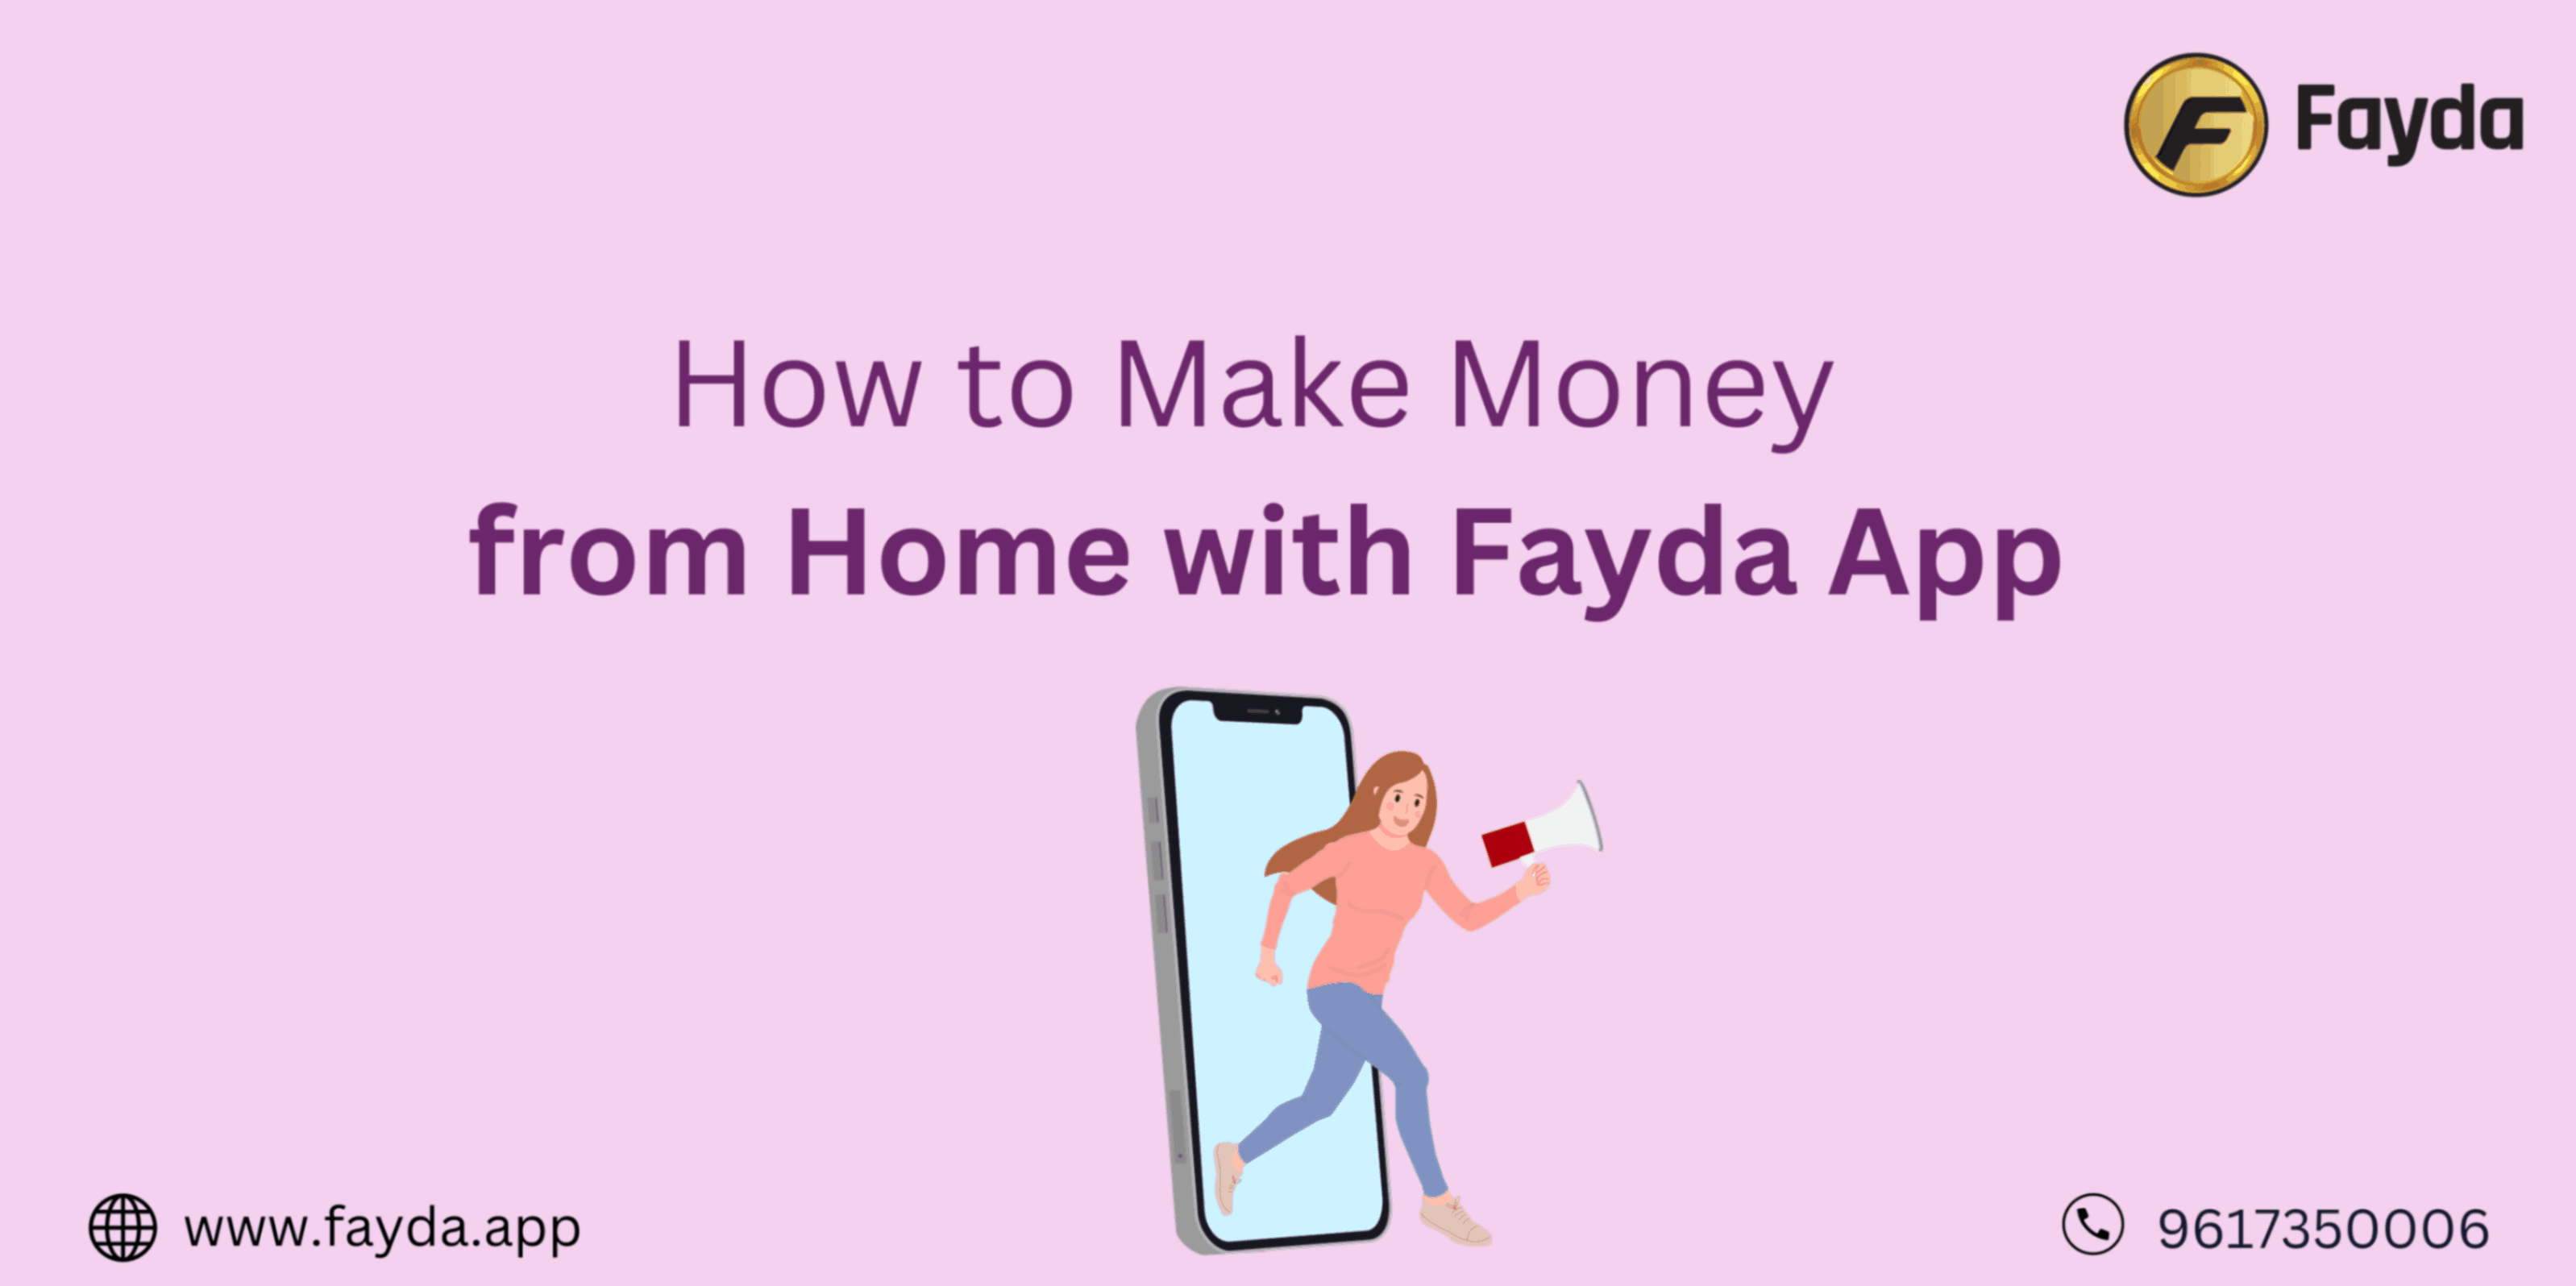 How to Make Money from Home with Fayda App